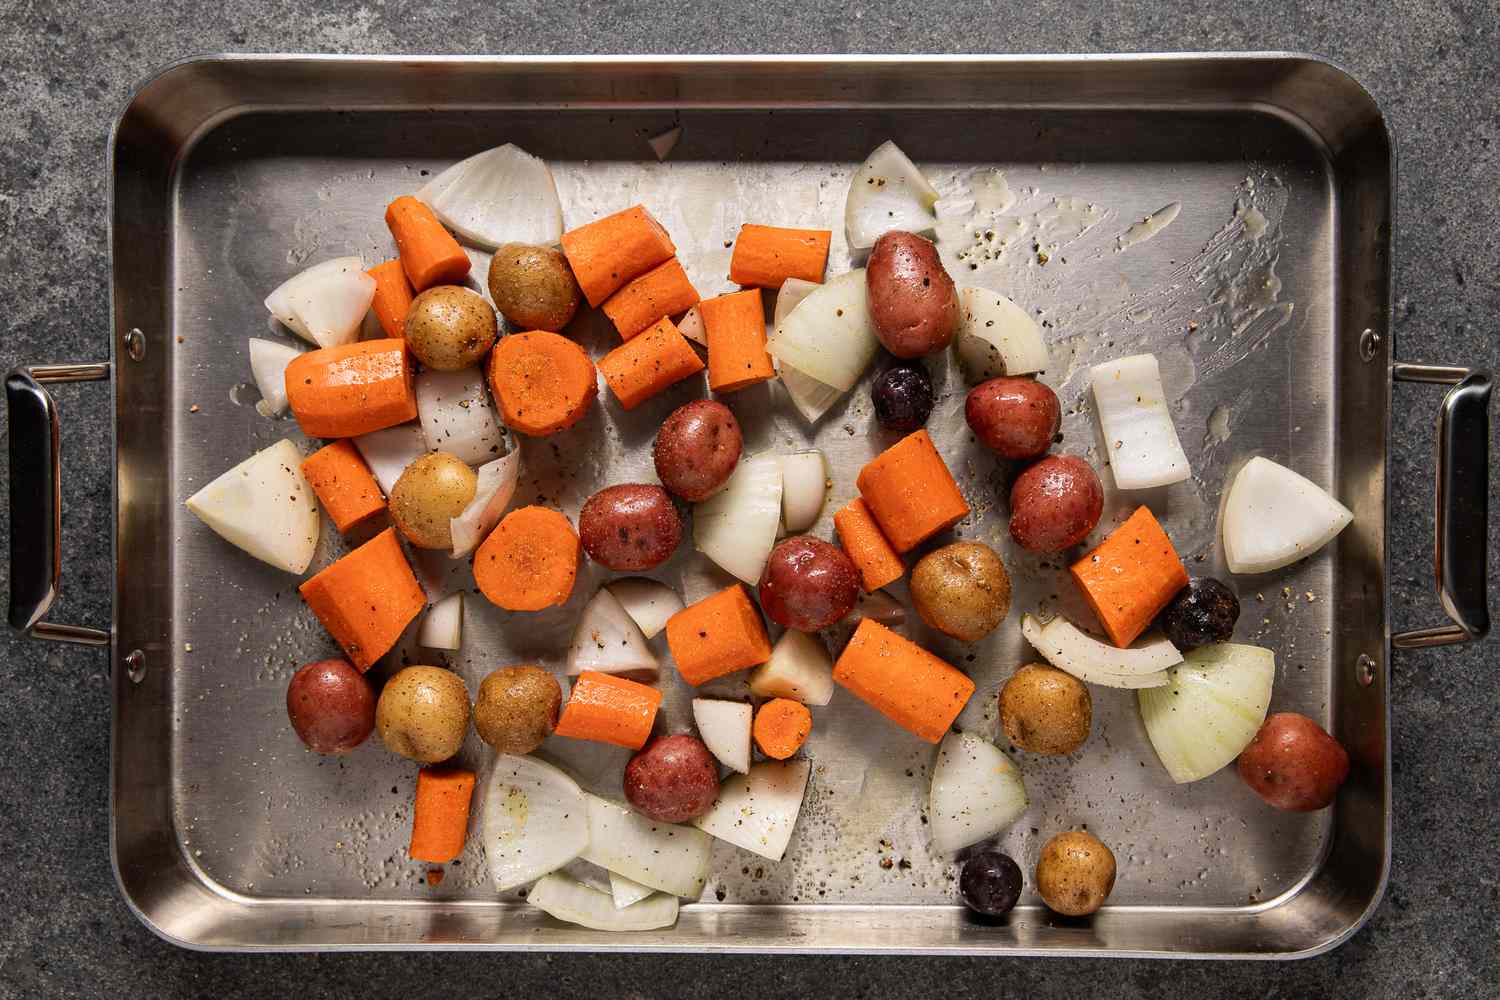 Seasoned chopped carrots, onions, and whole potatoes in a roasting pan for simple chicken roast recipe